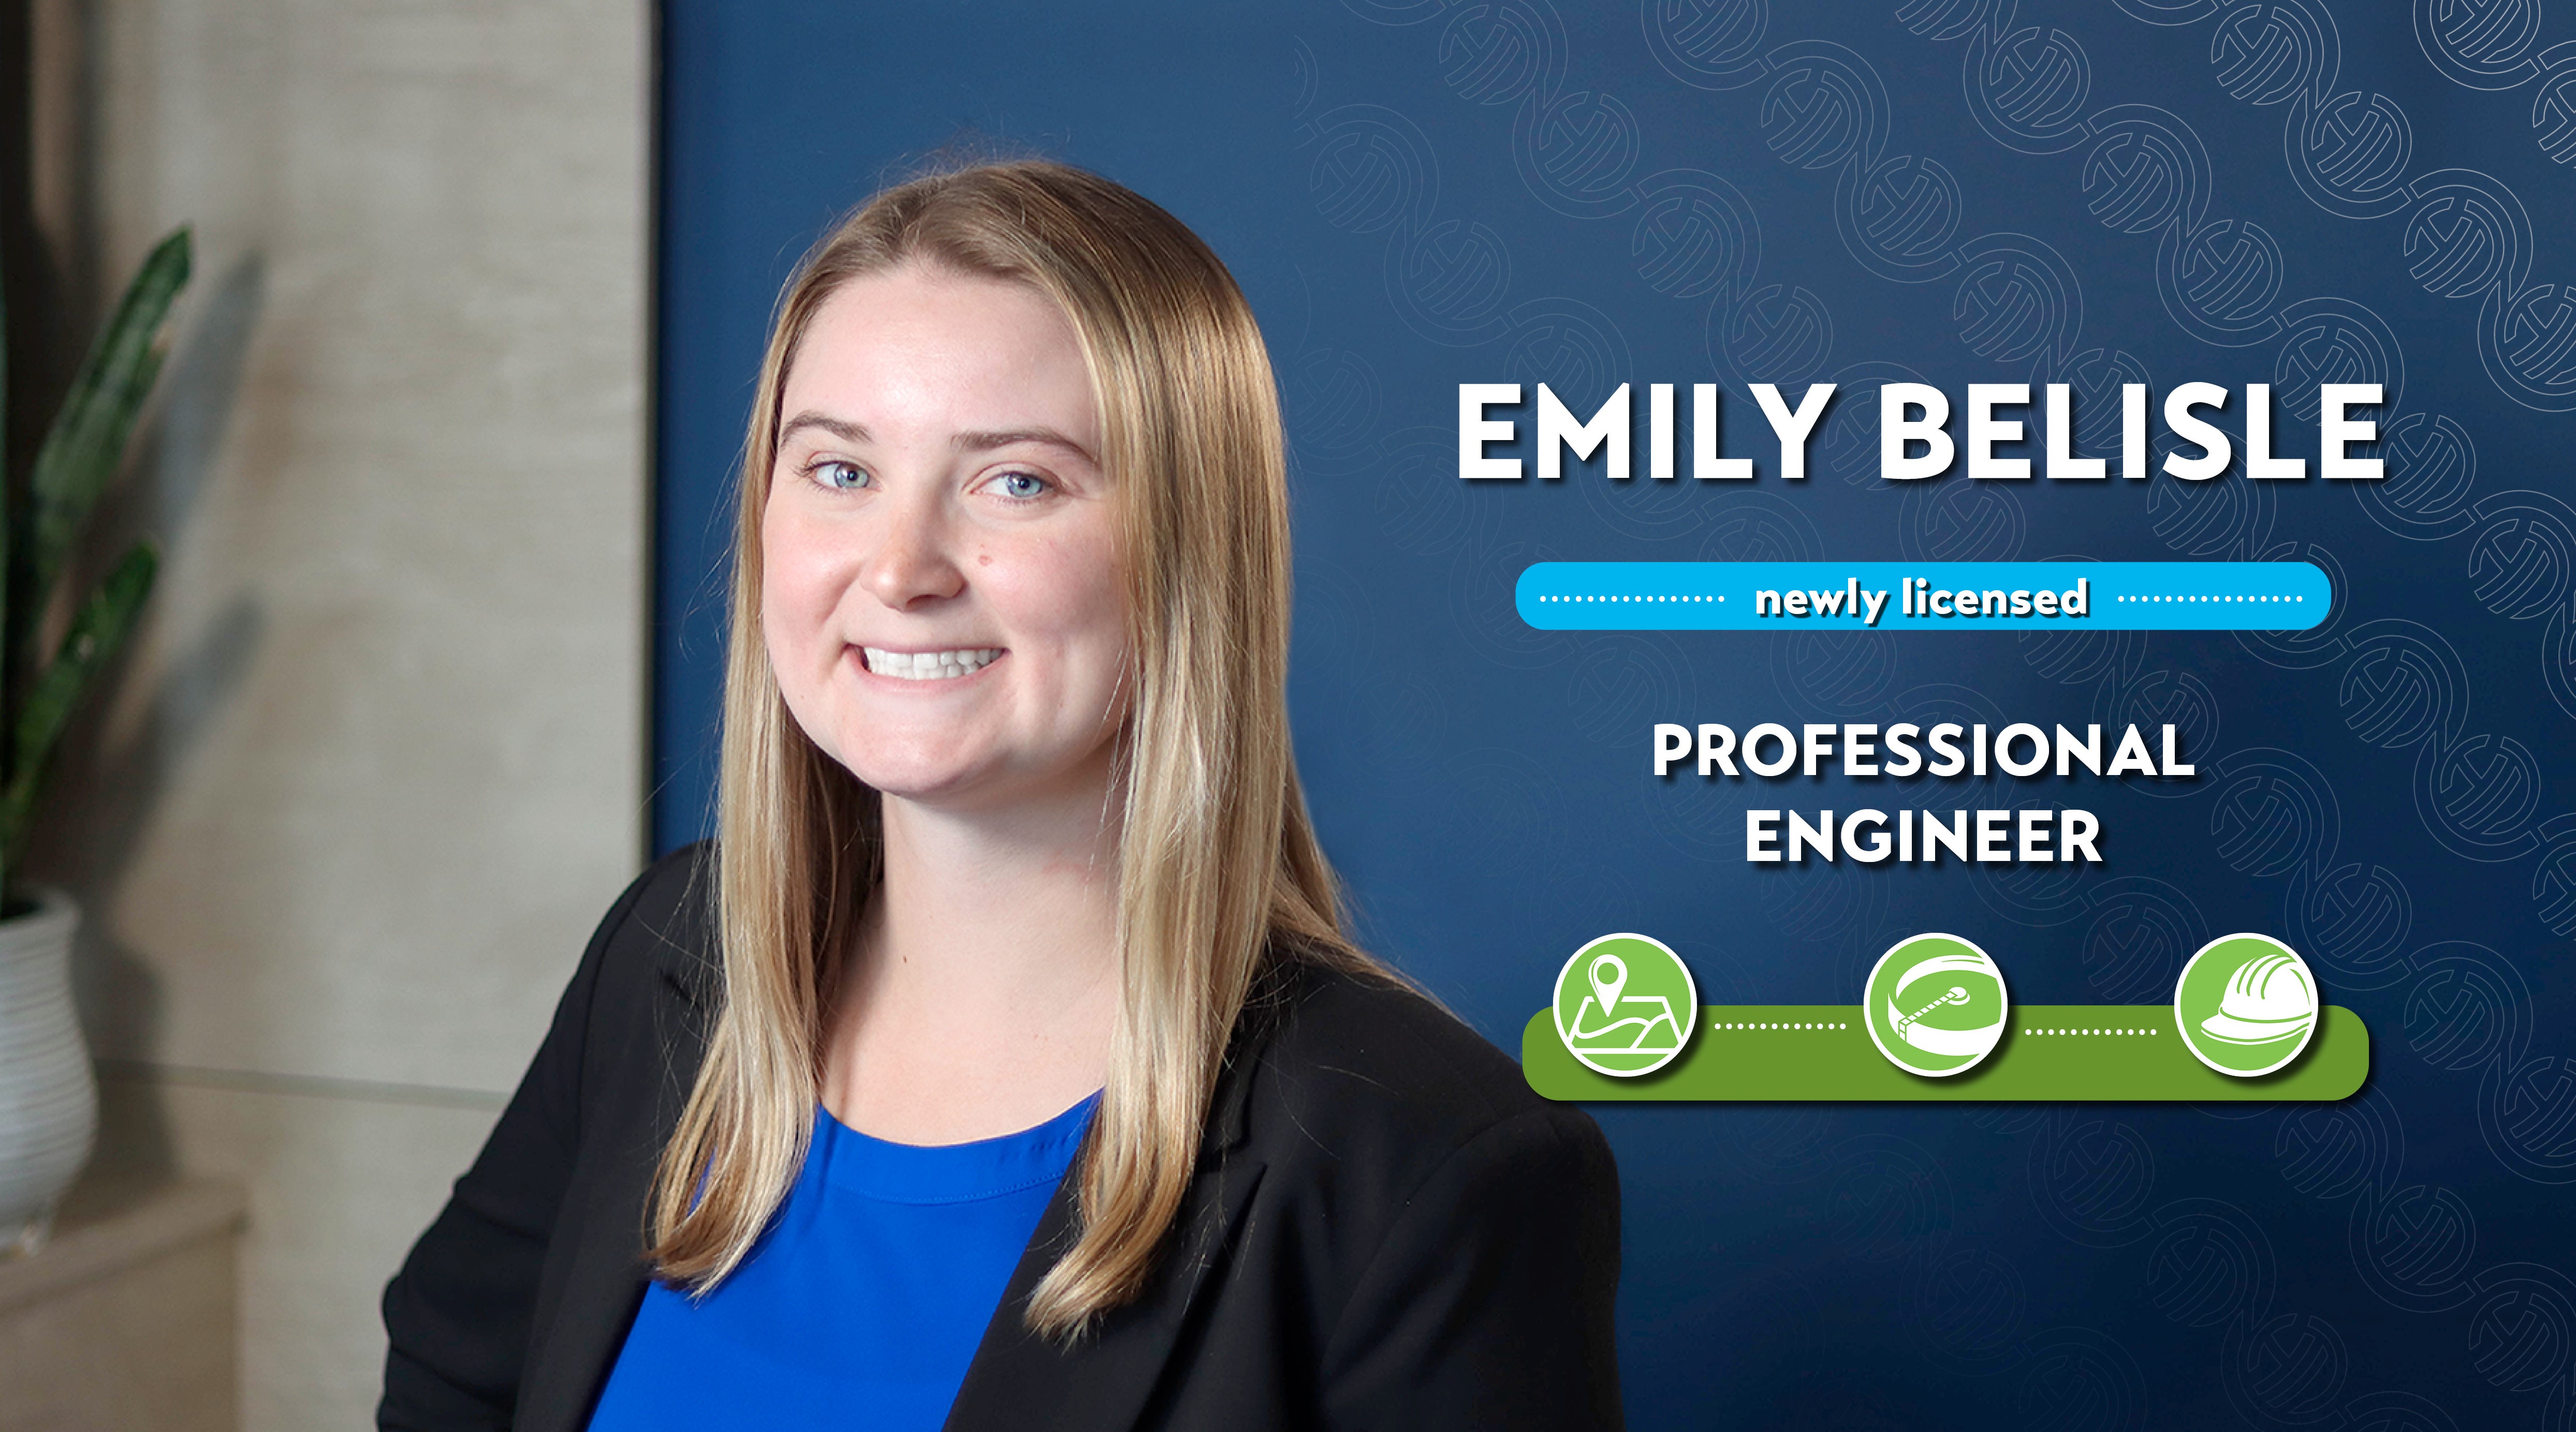 Emily Belisle's corporate headshot with a navy blue wall as a background. The graphic has her name and icons (for wastewater, civil/site, and construction) for which she works on projects for.